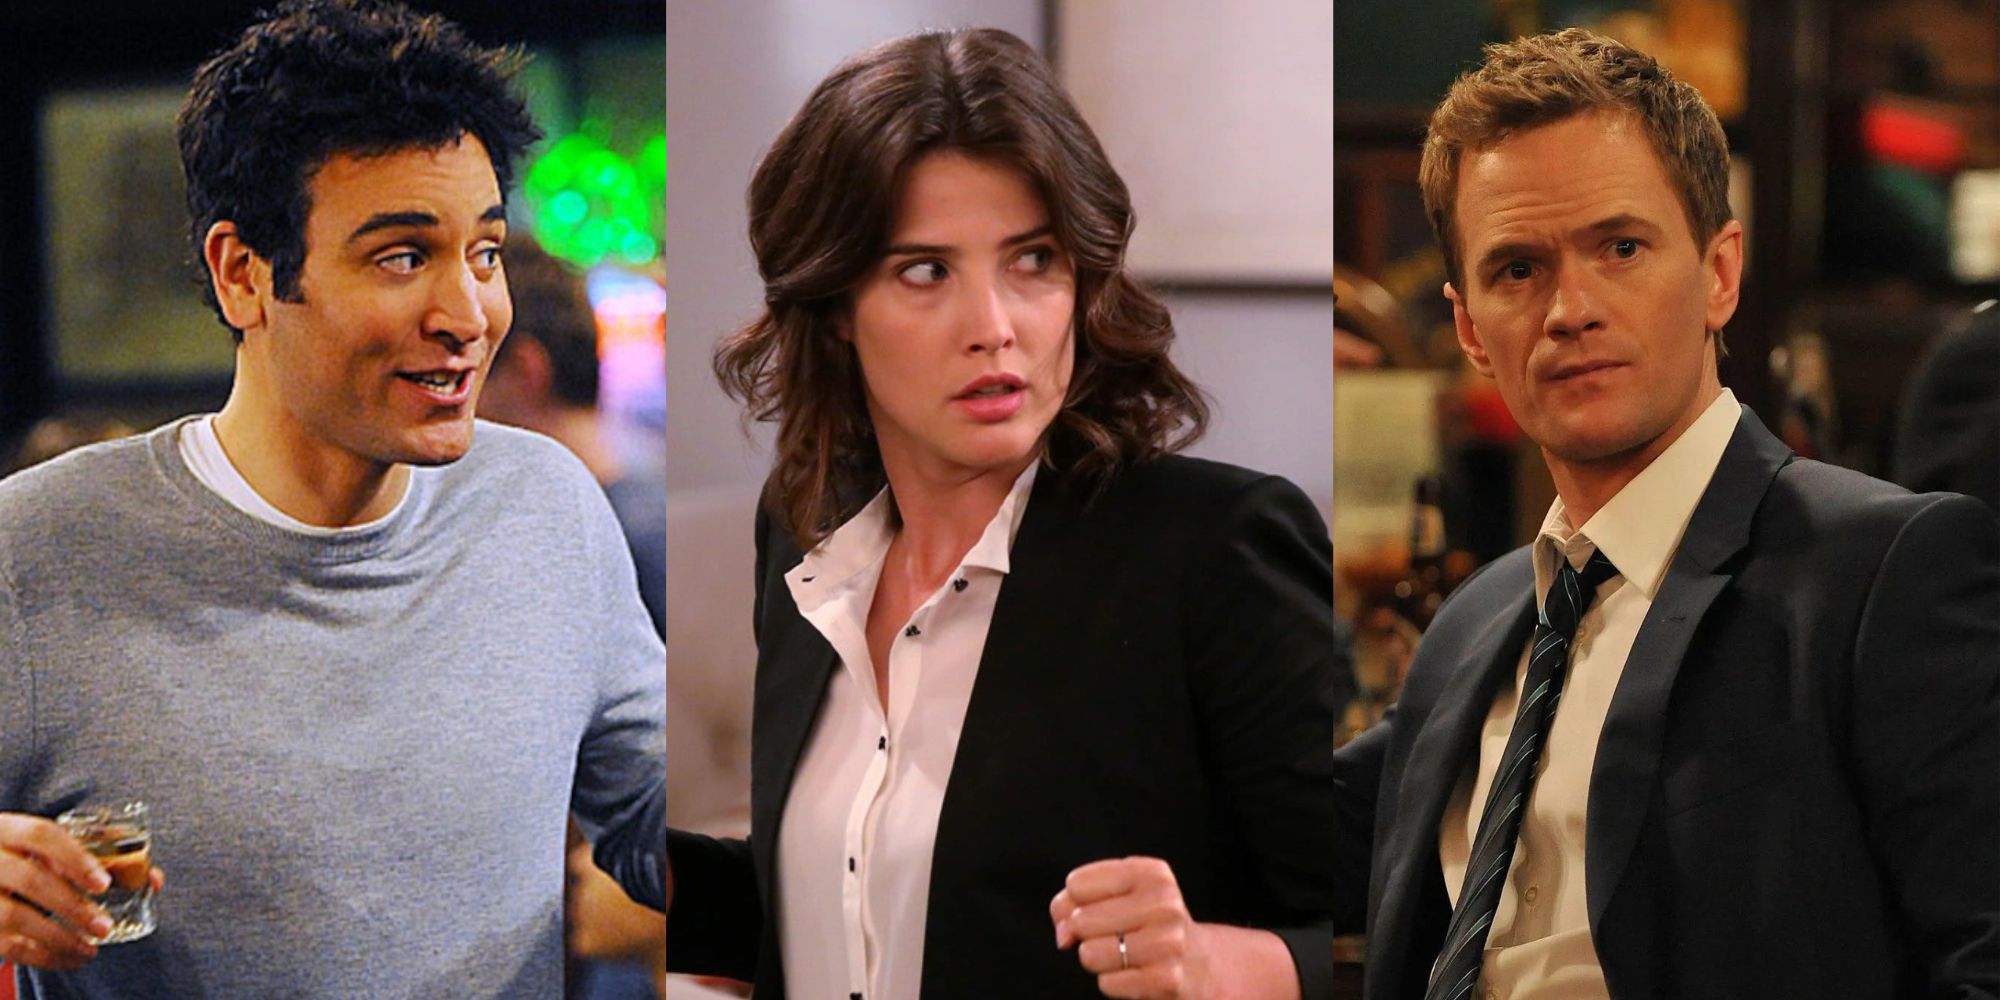 Split image of Ted, Robin and barney from How I Met Your Mother